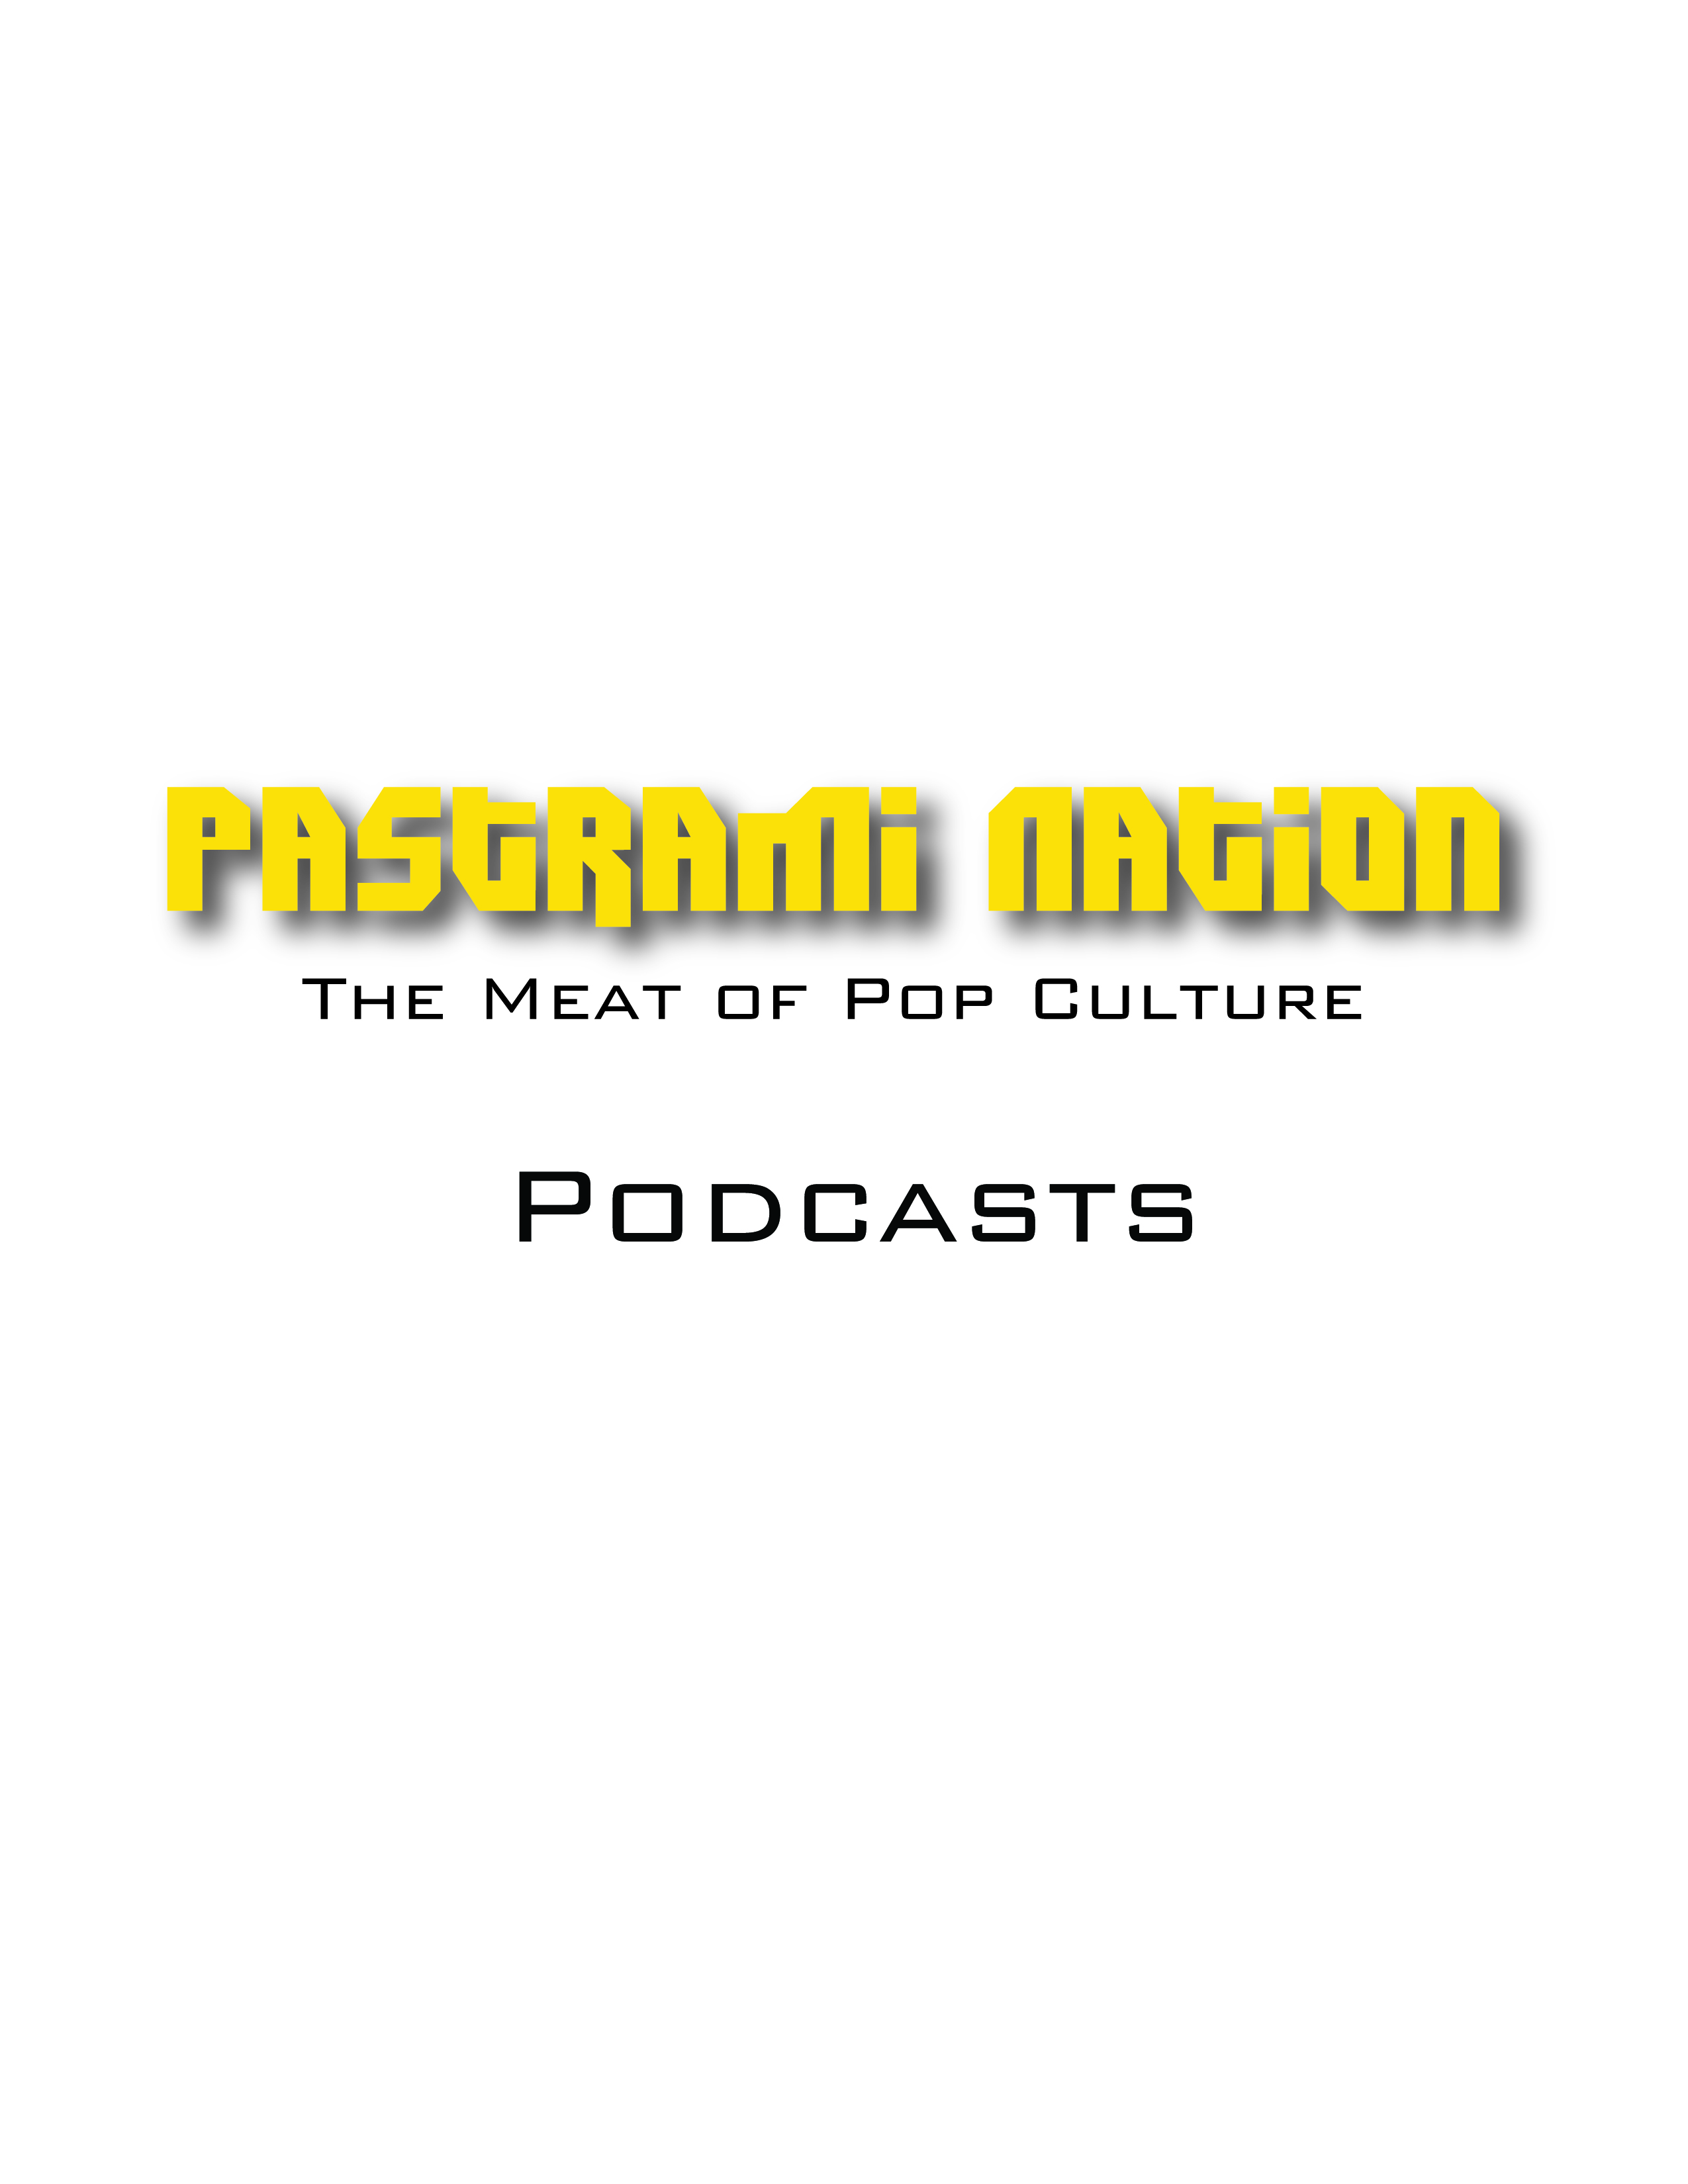 Podcasts – PASTRAMI NATION